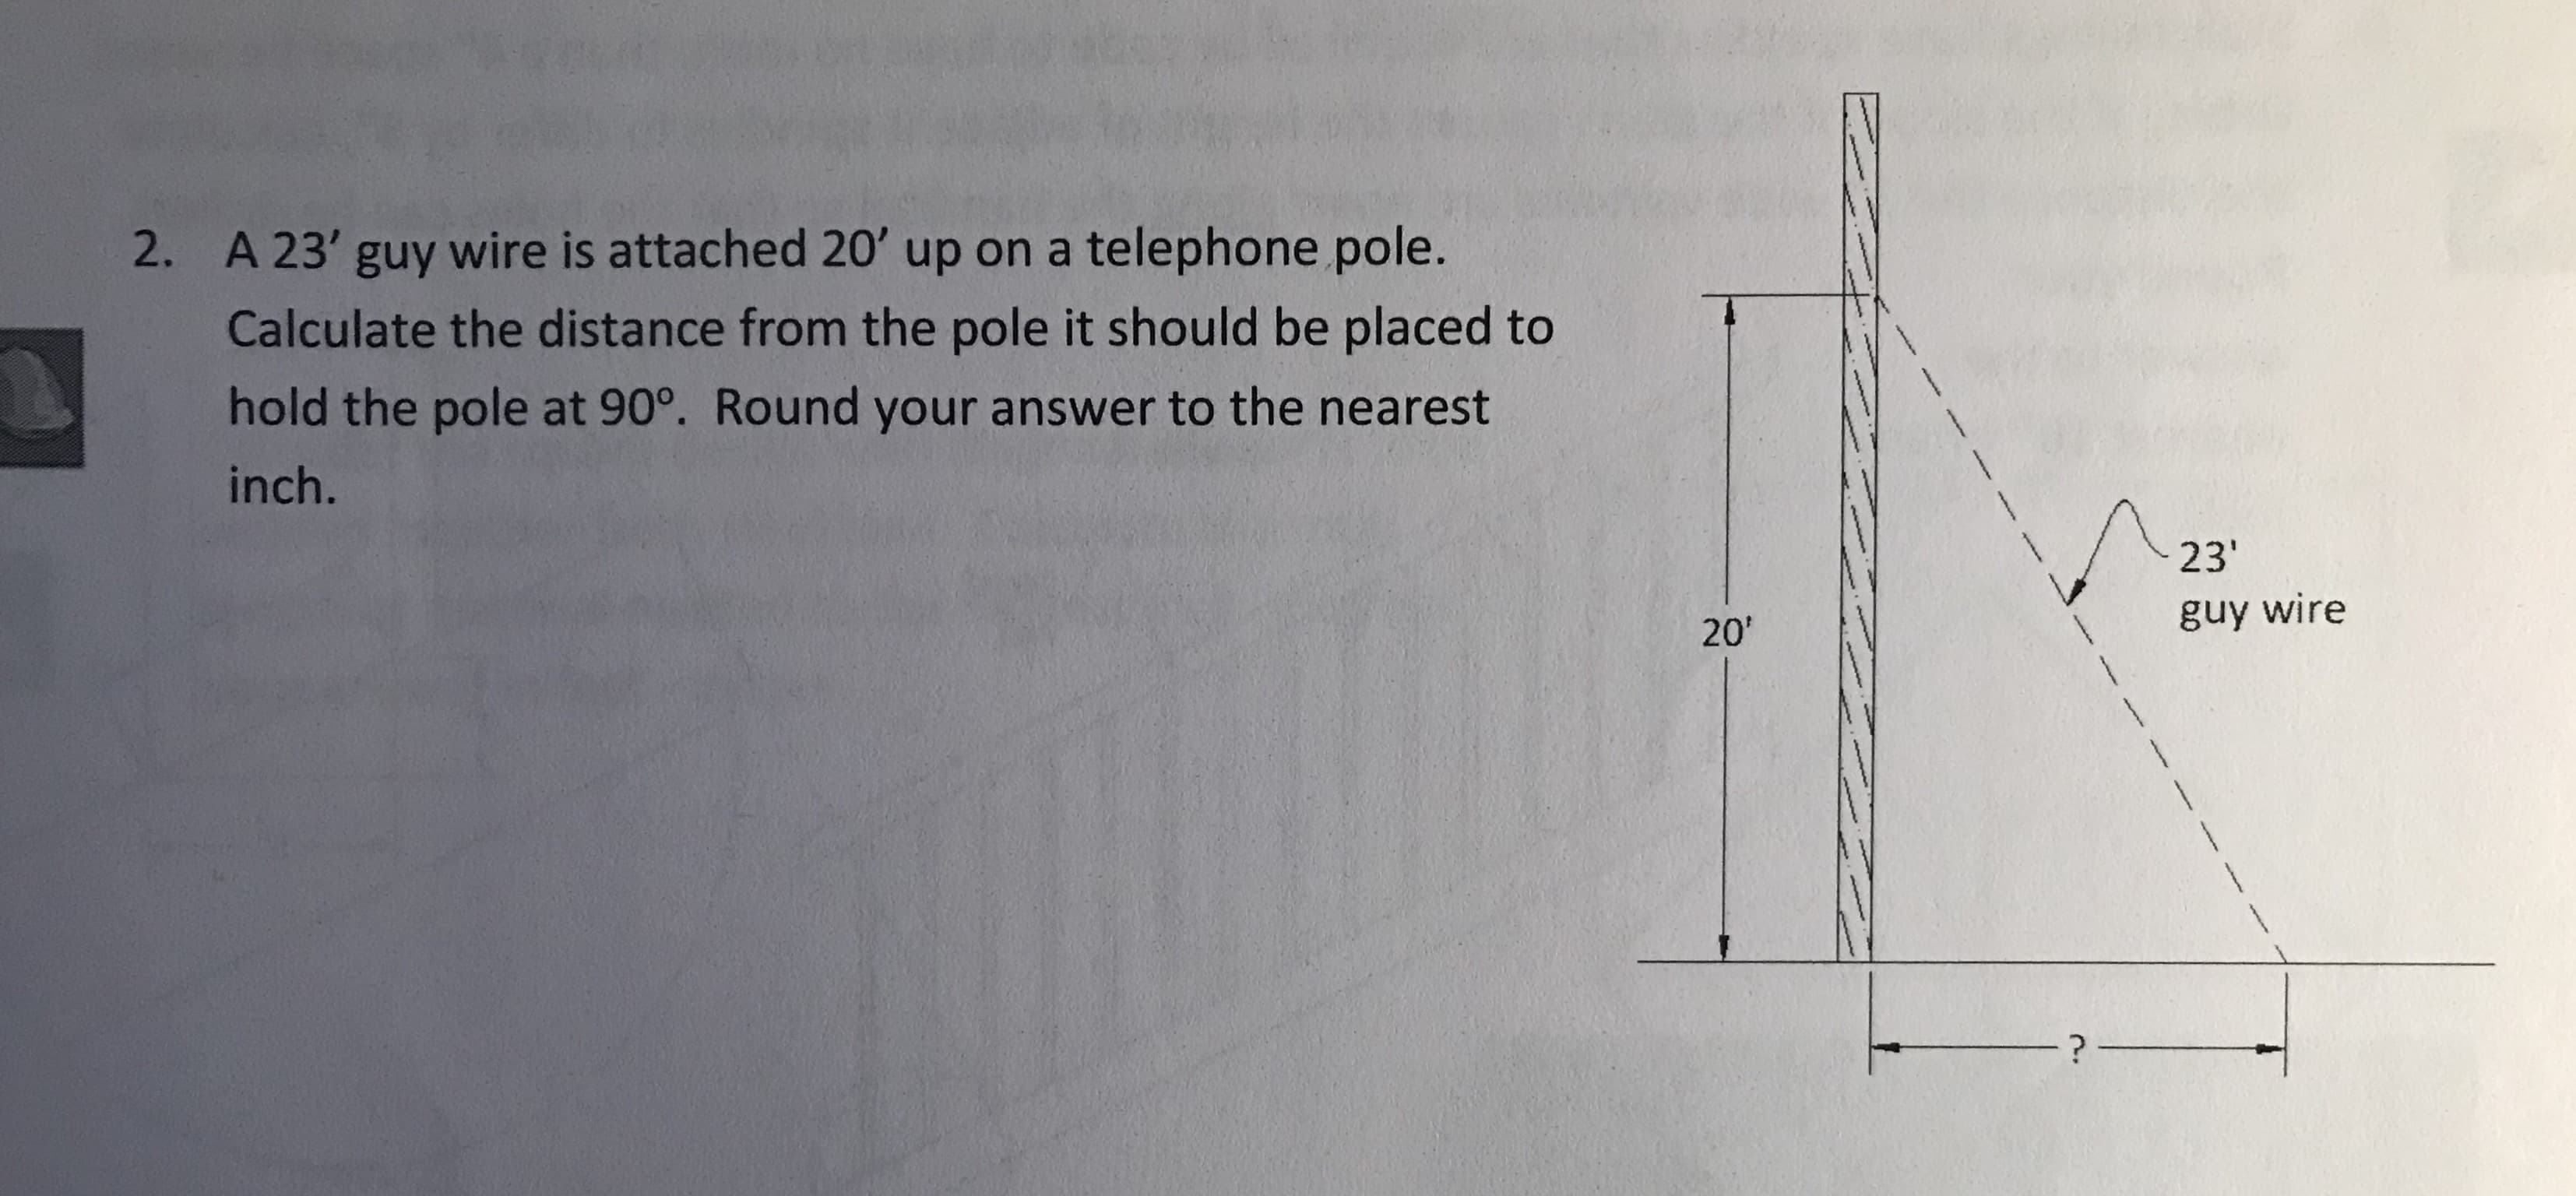 A 23' guy wire is attached 20' up on a telephone pole.
Calculate the distance from the pole it should be placed to
hold the pole at 90°. Round your answer to the nearest
inch.
2.
23
guy wire
20'
